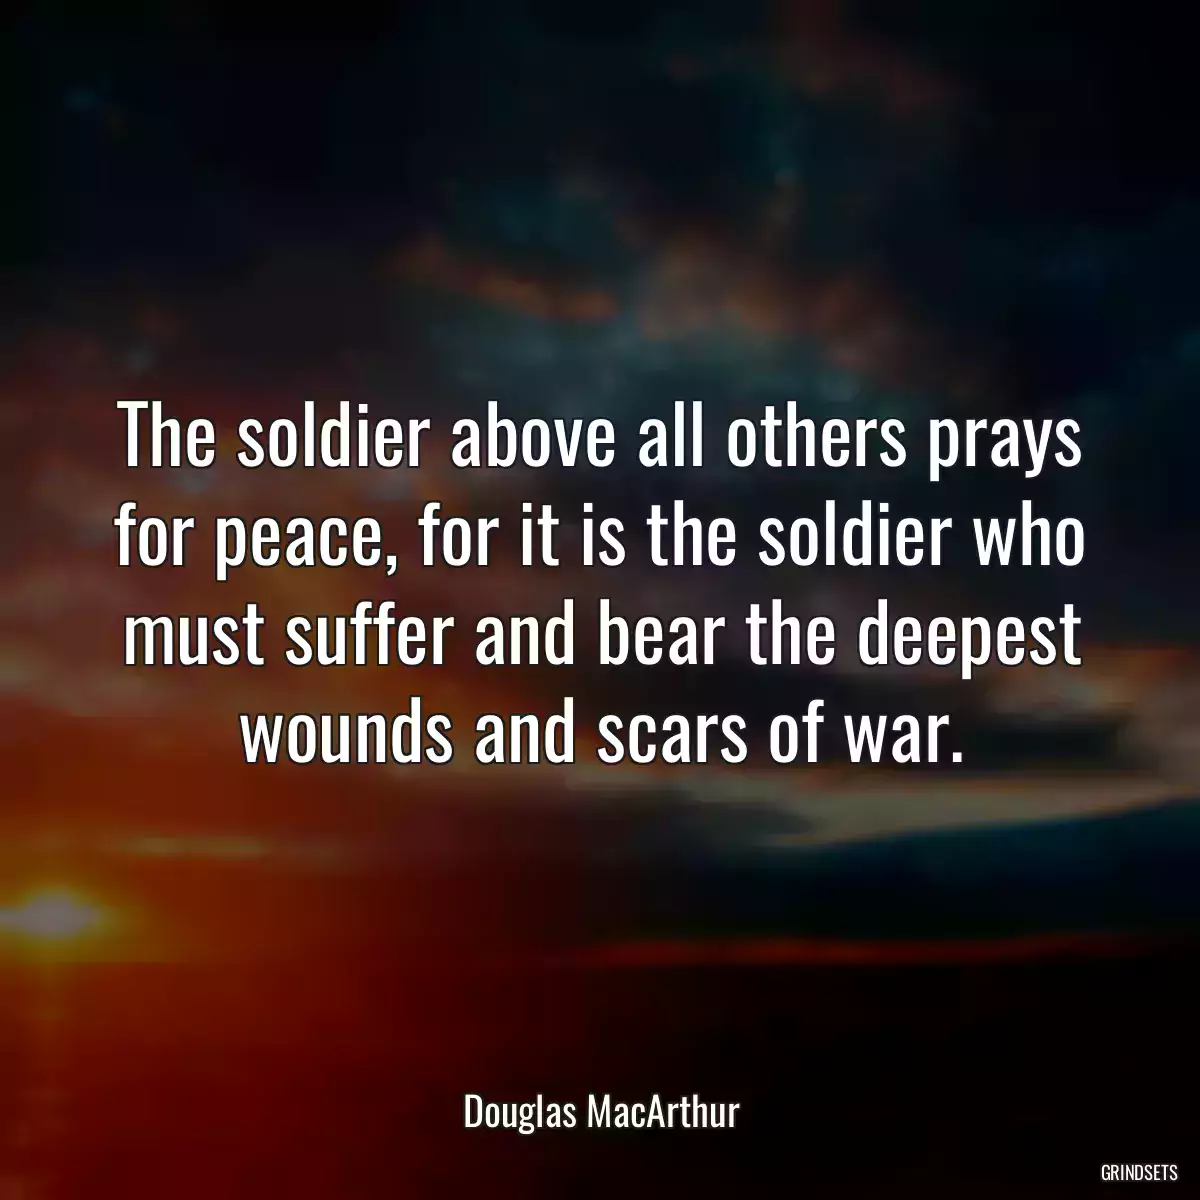 The soldier above all others prays for peace, for it is the soldier who must suffer and bear the deepest wounds and scars of war.